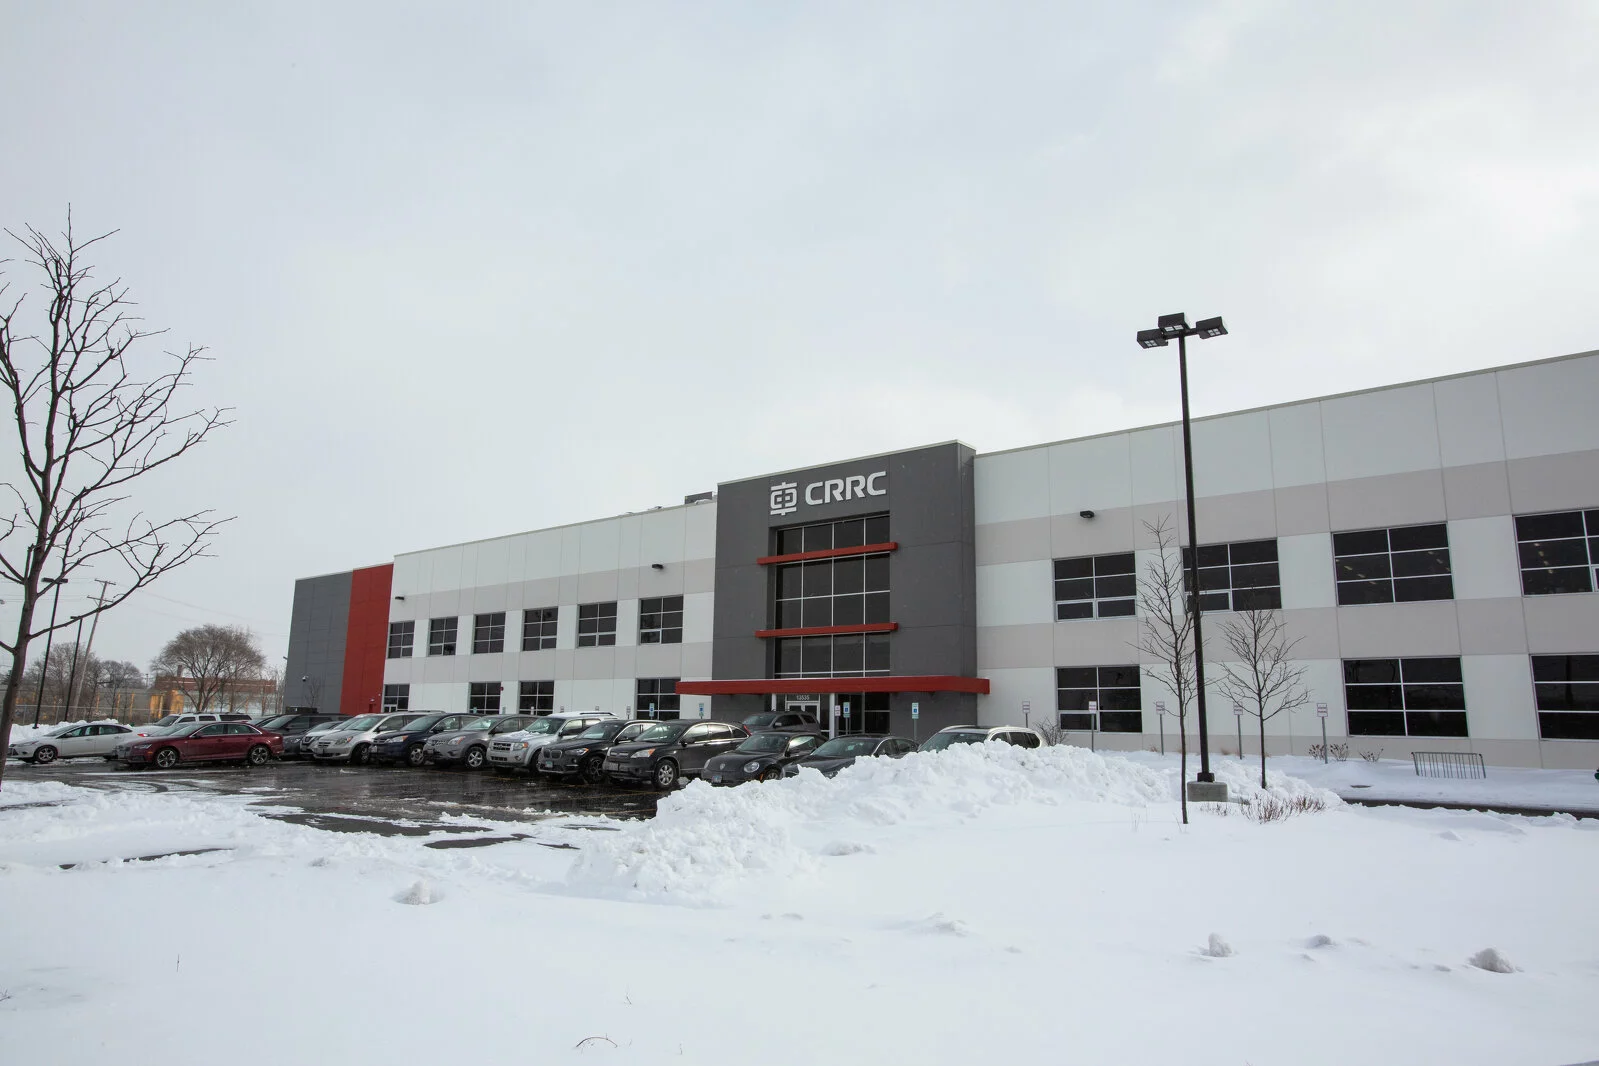 Exterior Building, gray and white building with red trim, parking lot in front of building, photo taken on a snowy day.